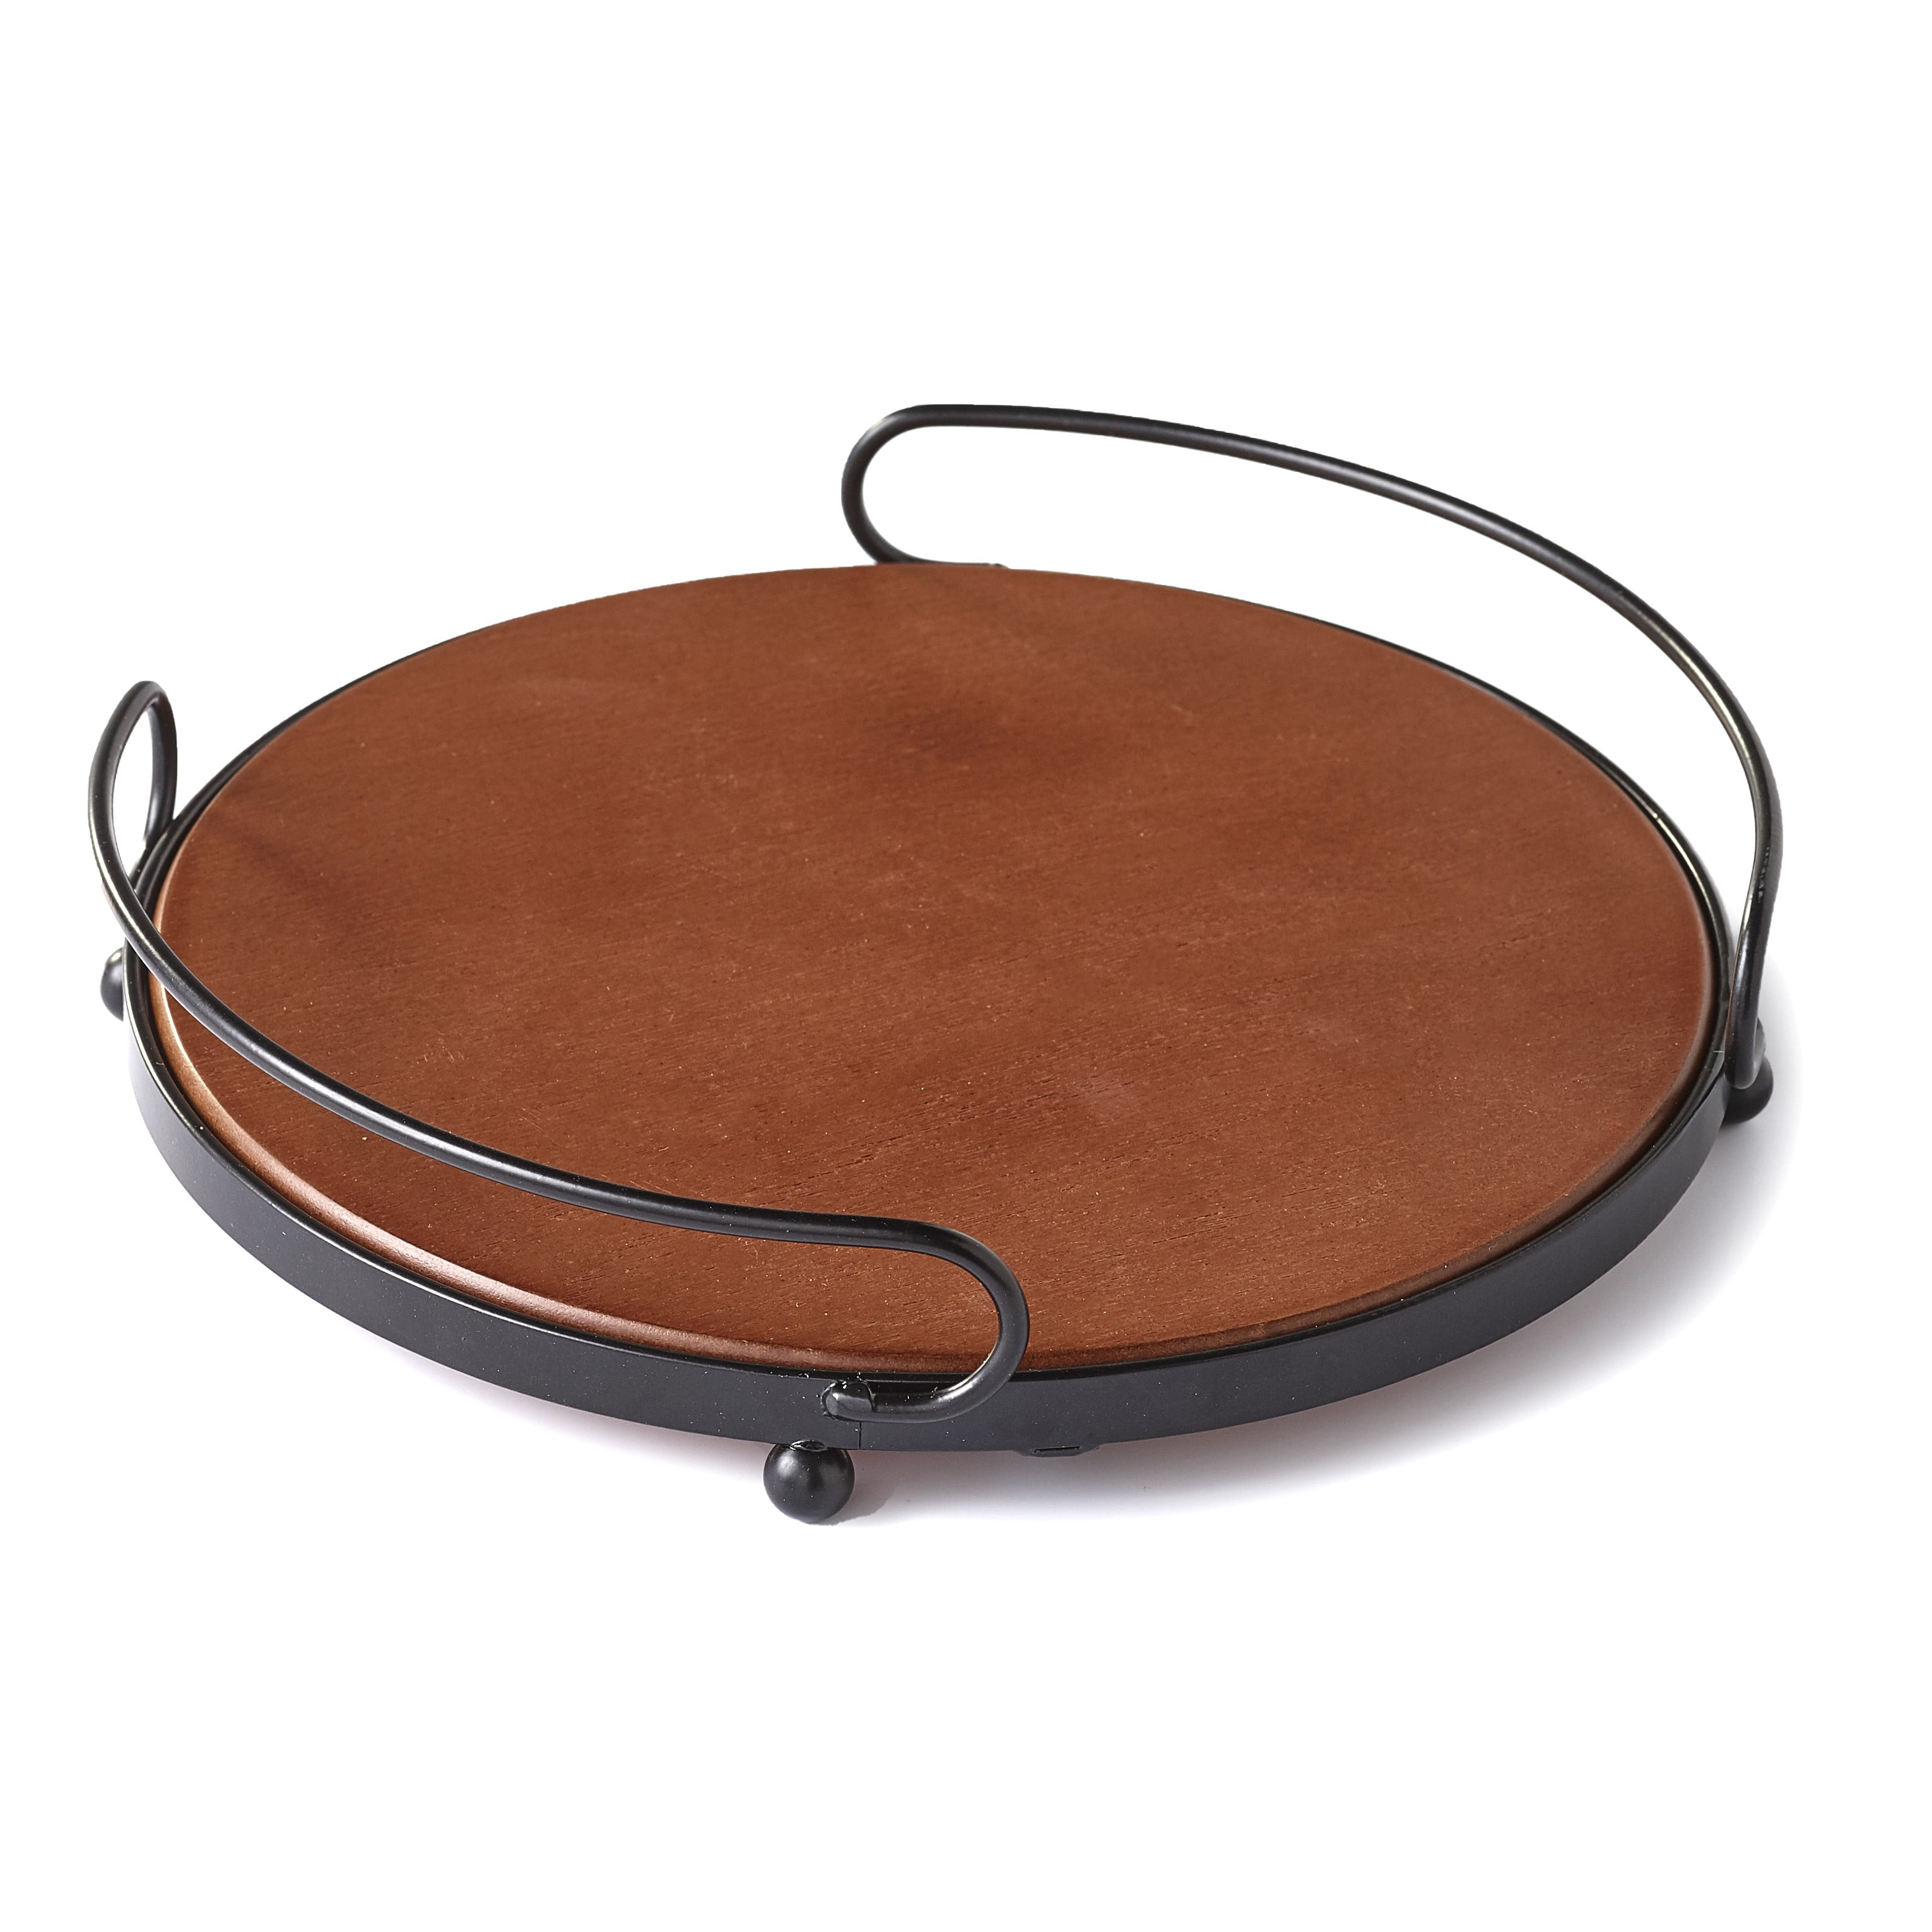 Round Wooden Serving Tray With Metal, Round Leather Tray Table